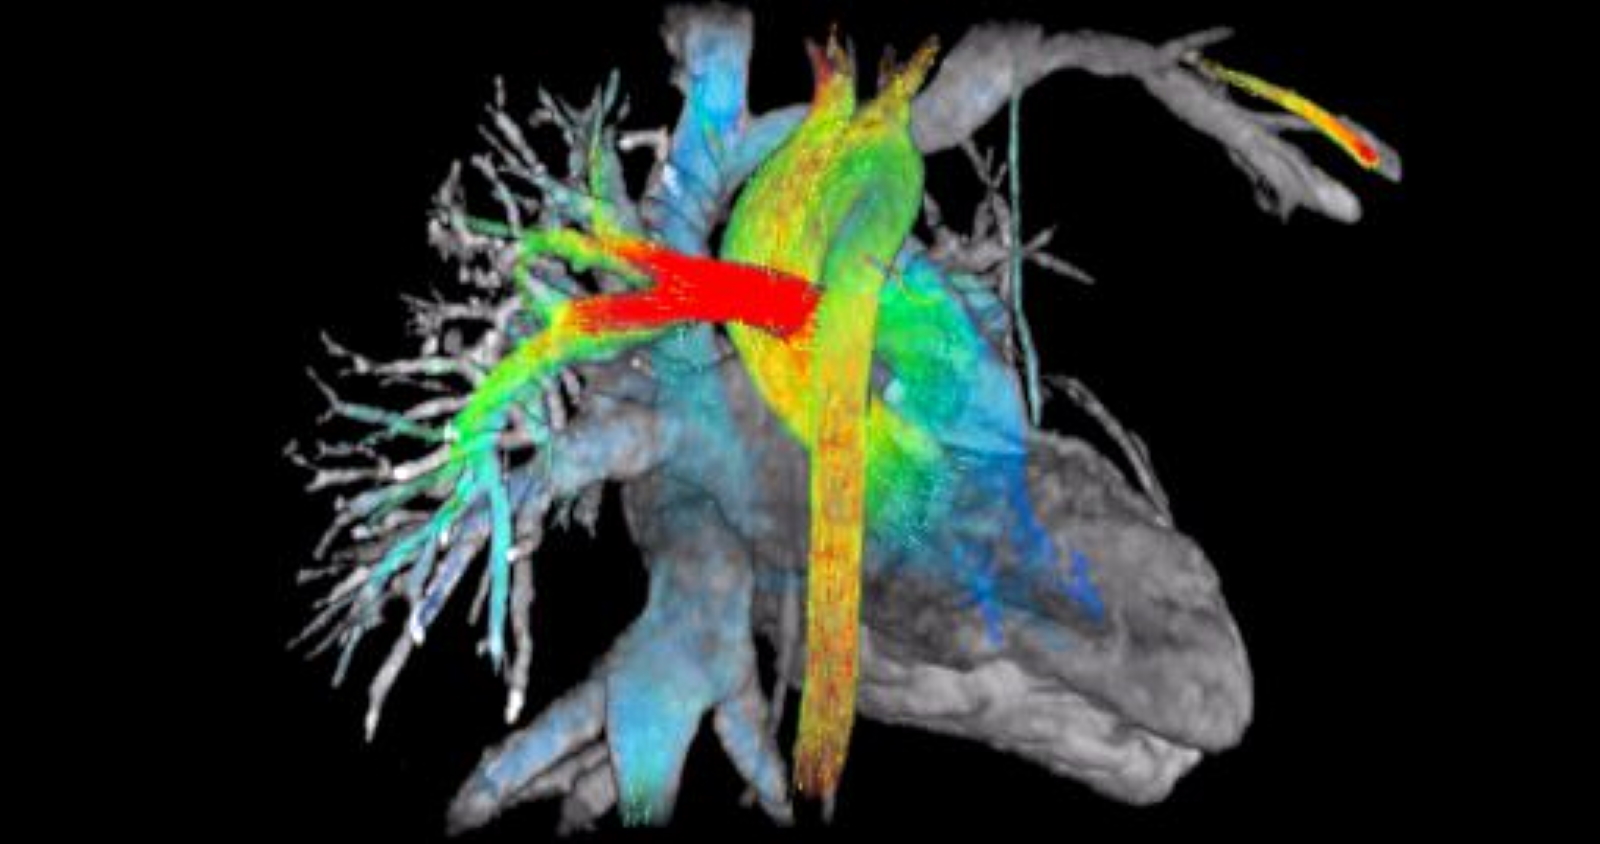 Magnetic resonance imaging can show images of the heart and blood flow.